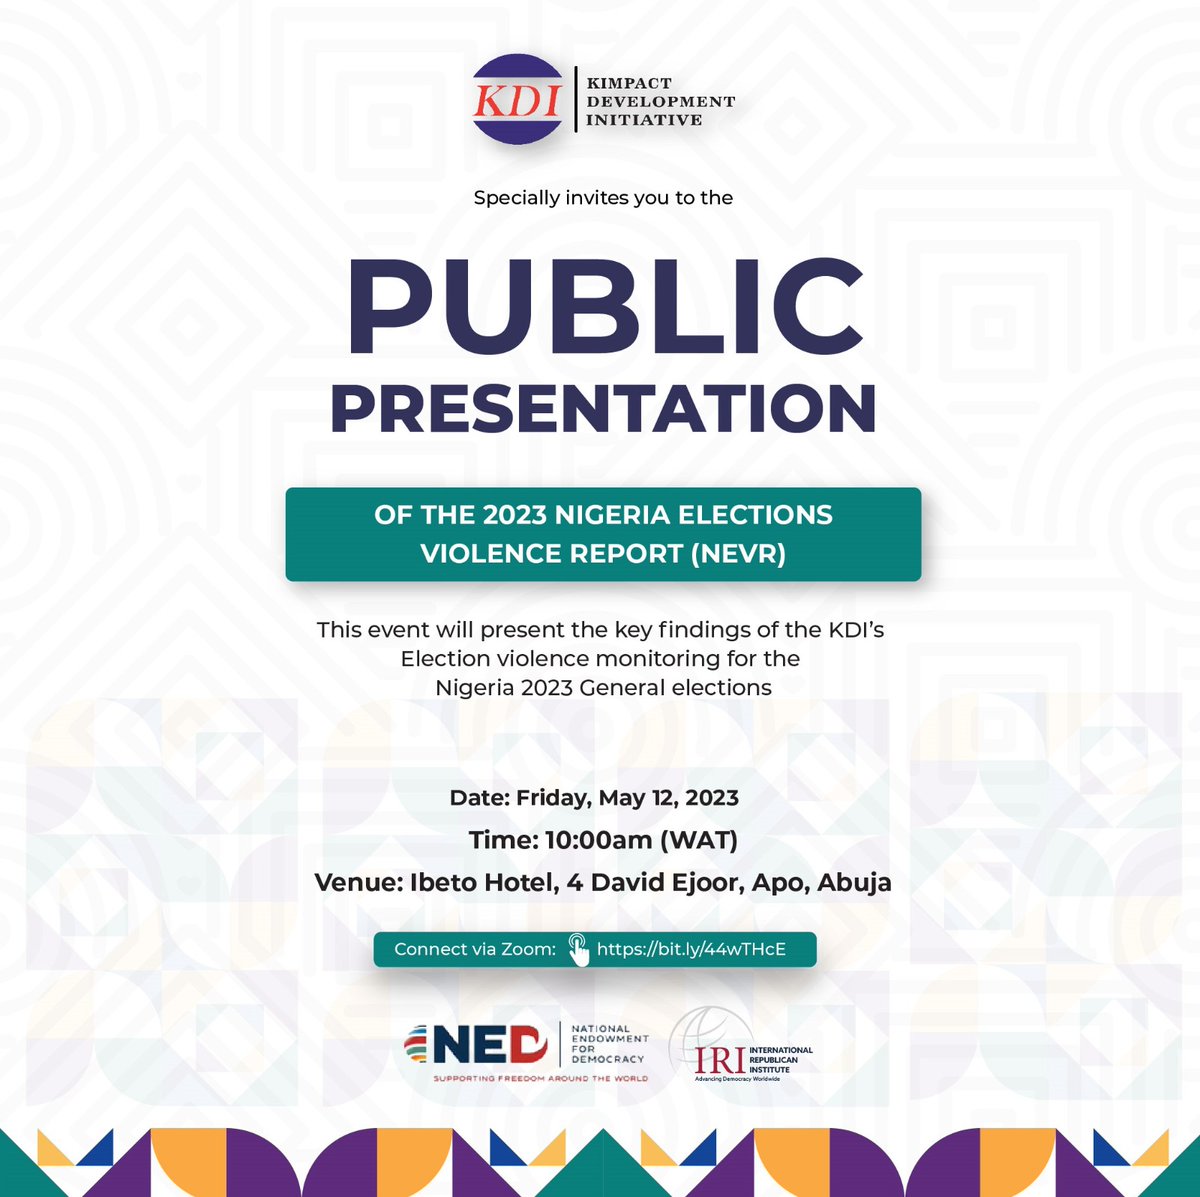 Join @KDI_ng next Friday May 12, 2023, for a #Data-packed event on Public Presentation of the 2023 Nigeria Elections Violence Report (NEVR). 
#NEVR #KDI #DataDriven #NED #IRI
#2023Elections #KeyFindings #AccurateData @bukolaidowu
@femijohn0 @biodunbjk11 @NEDemocracy @IRIglobal